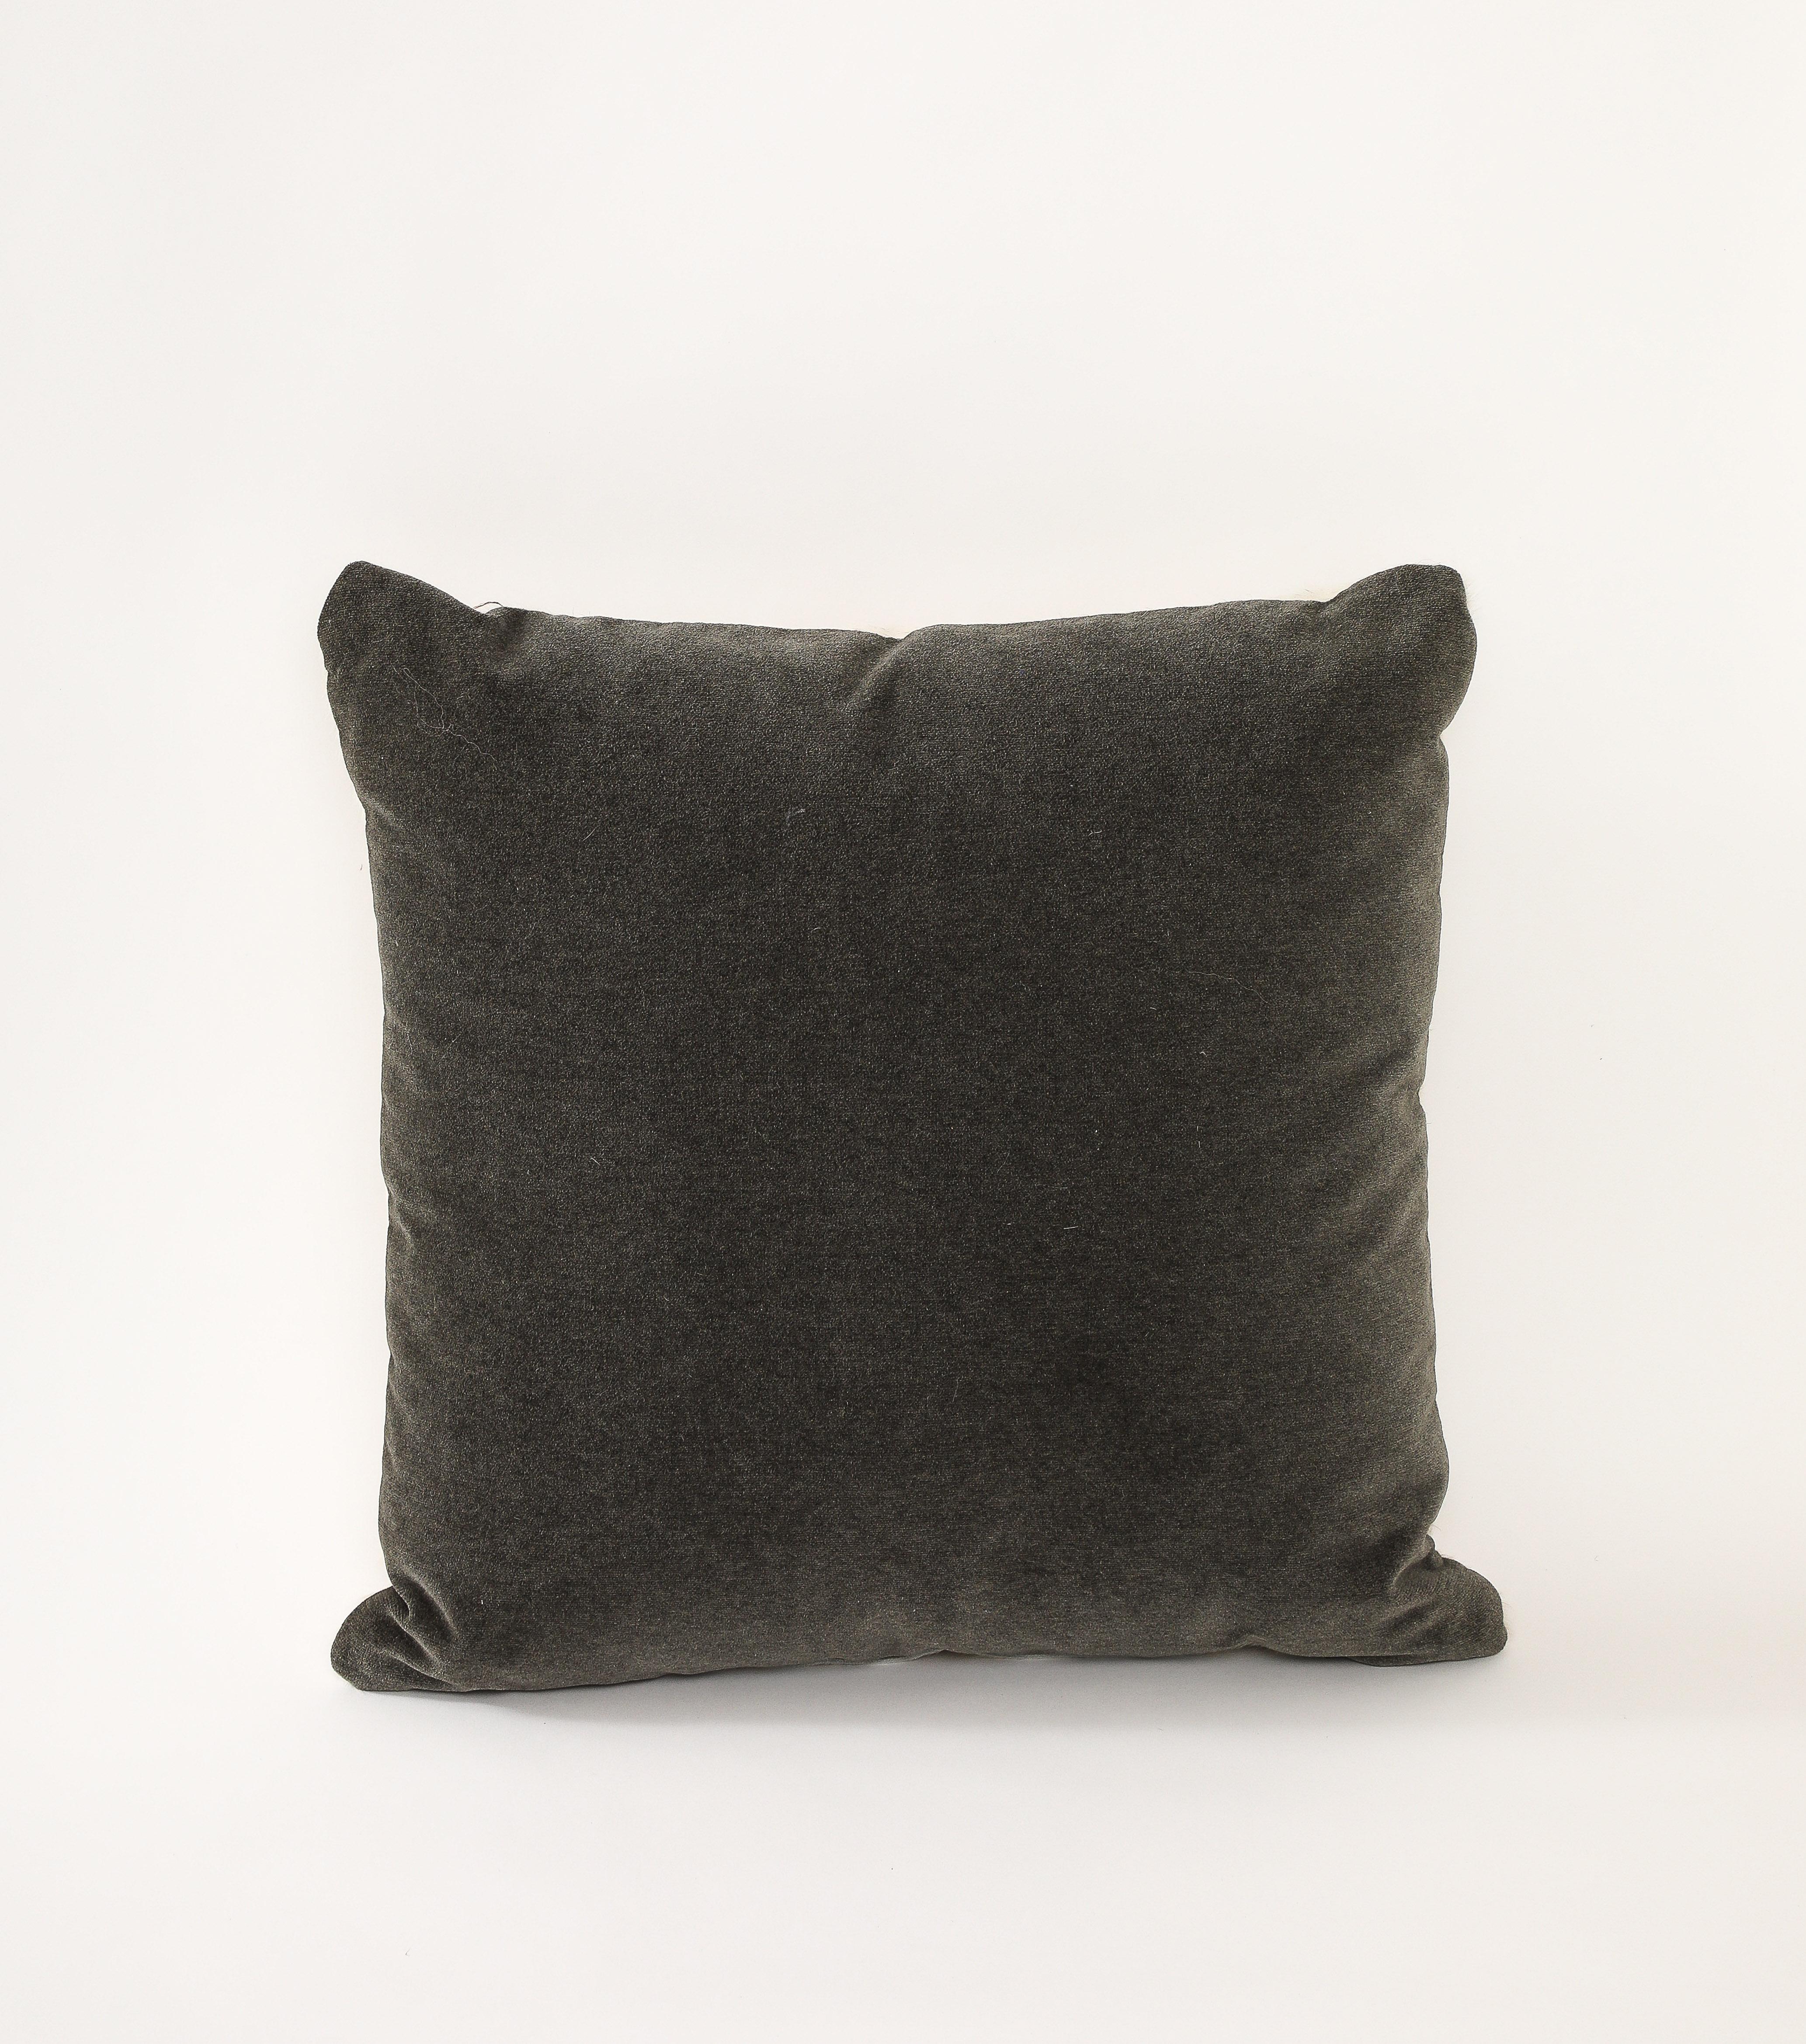 Contemporary Bespoke Natural Pony Hide Pillow For Sale